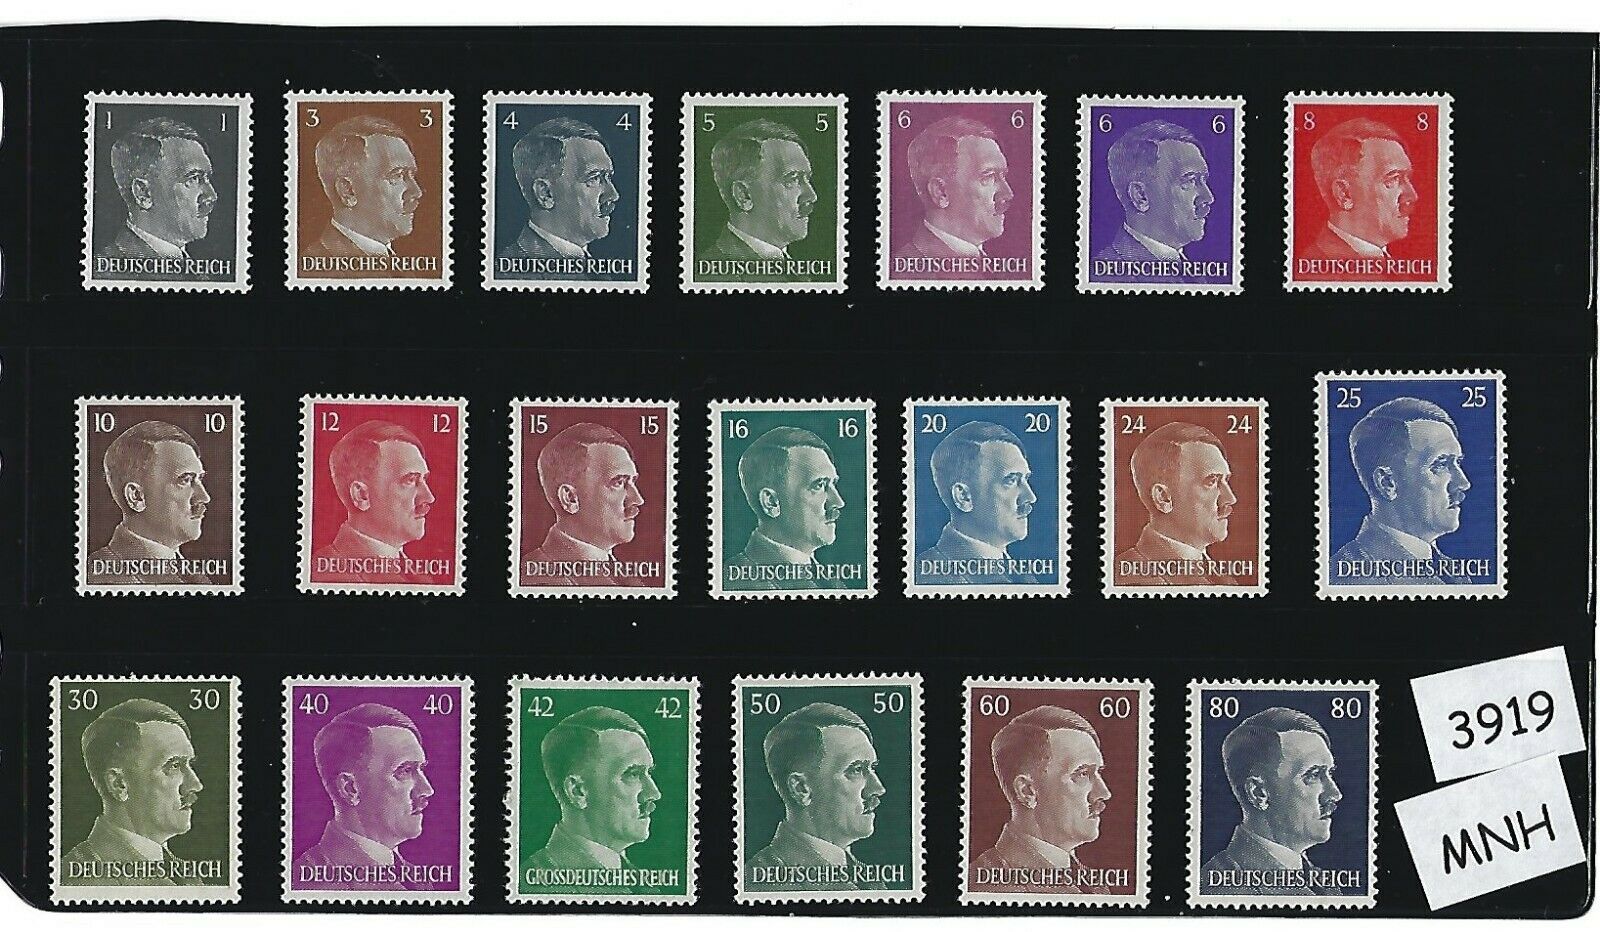 Mnh Stamp Set / 20 Adolph Hitler Stamps / Third Reich / Wwii Germany / 1941-1944